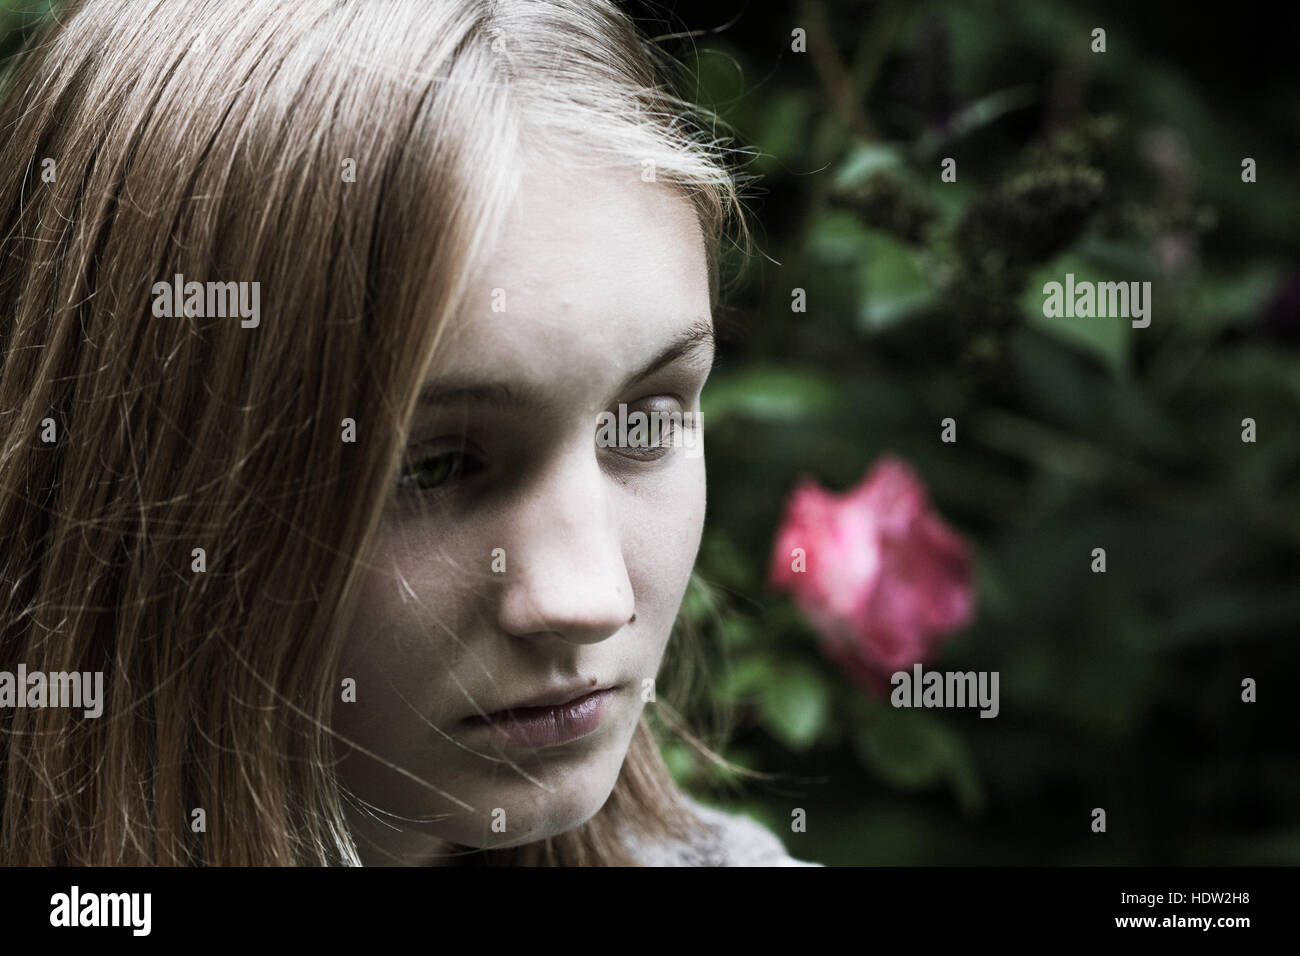 Sad and vulnerable girl Stock Photo